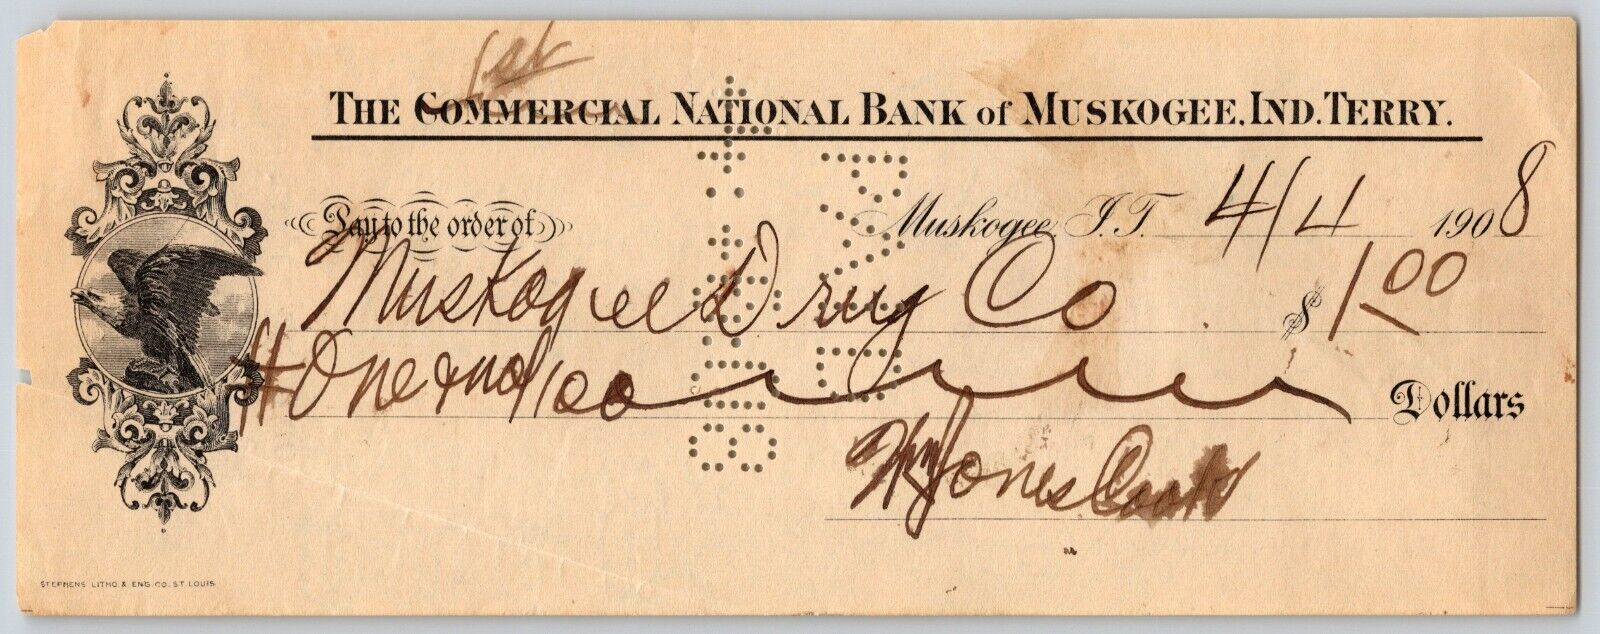 Muskogee, OK 1908 Indian Territory* Commercial National Bank Check - Scarce